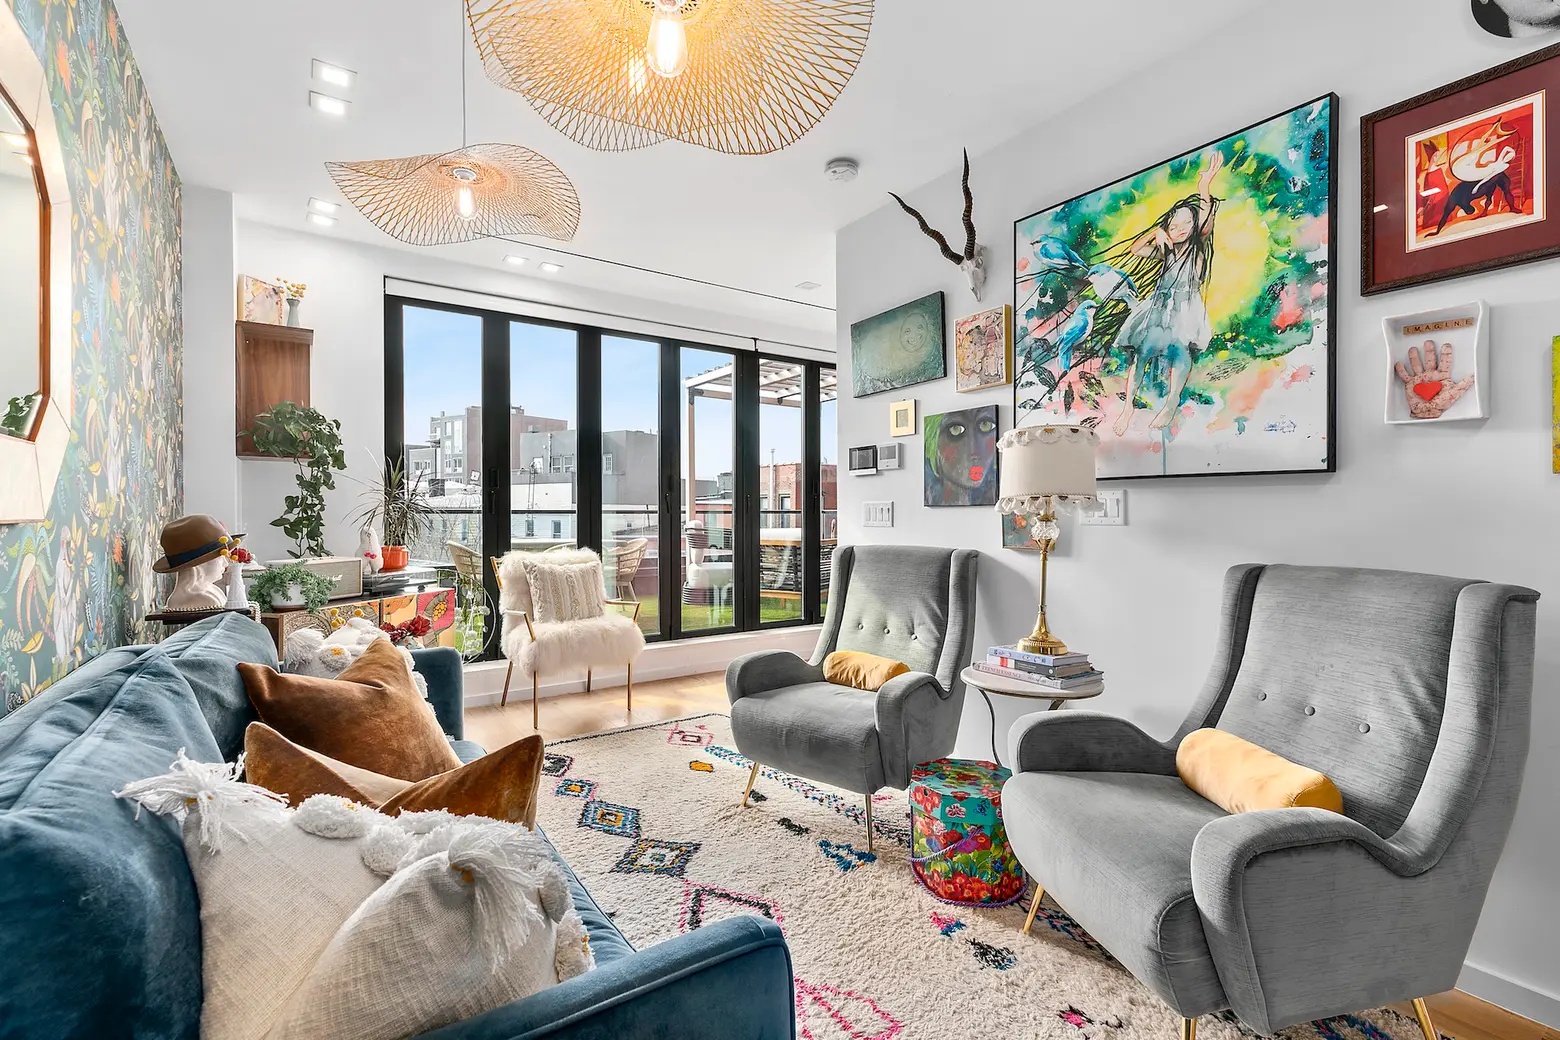 If you love pattern and color, this $1.5M Williamsburg condo is for you